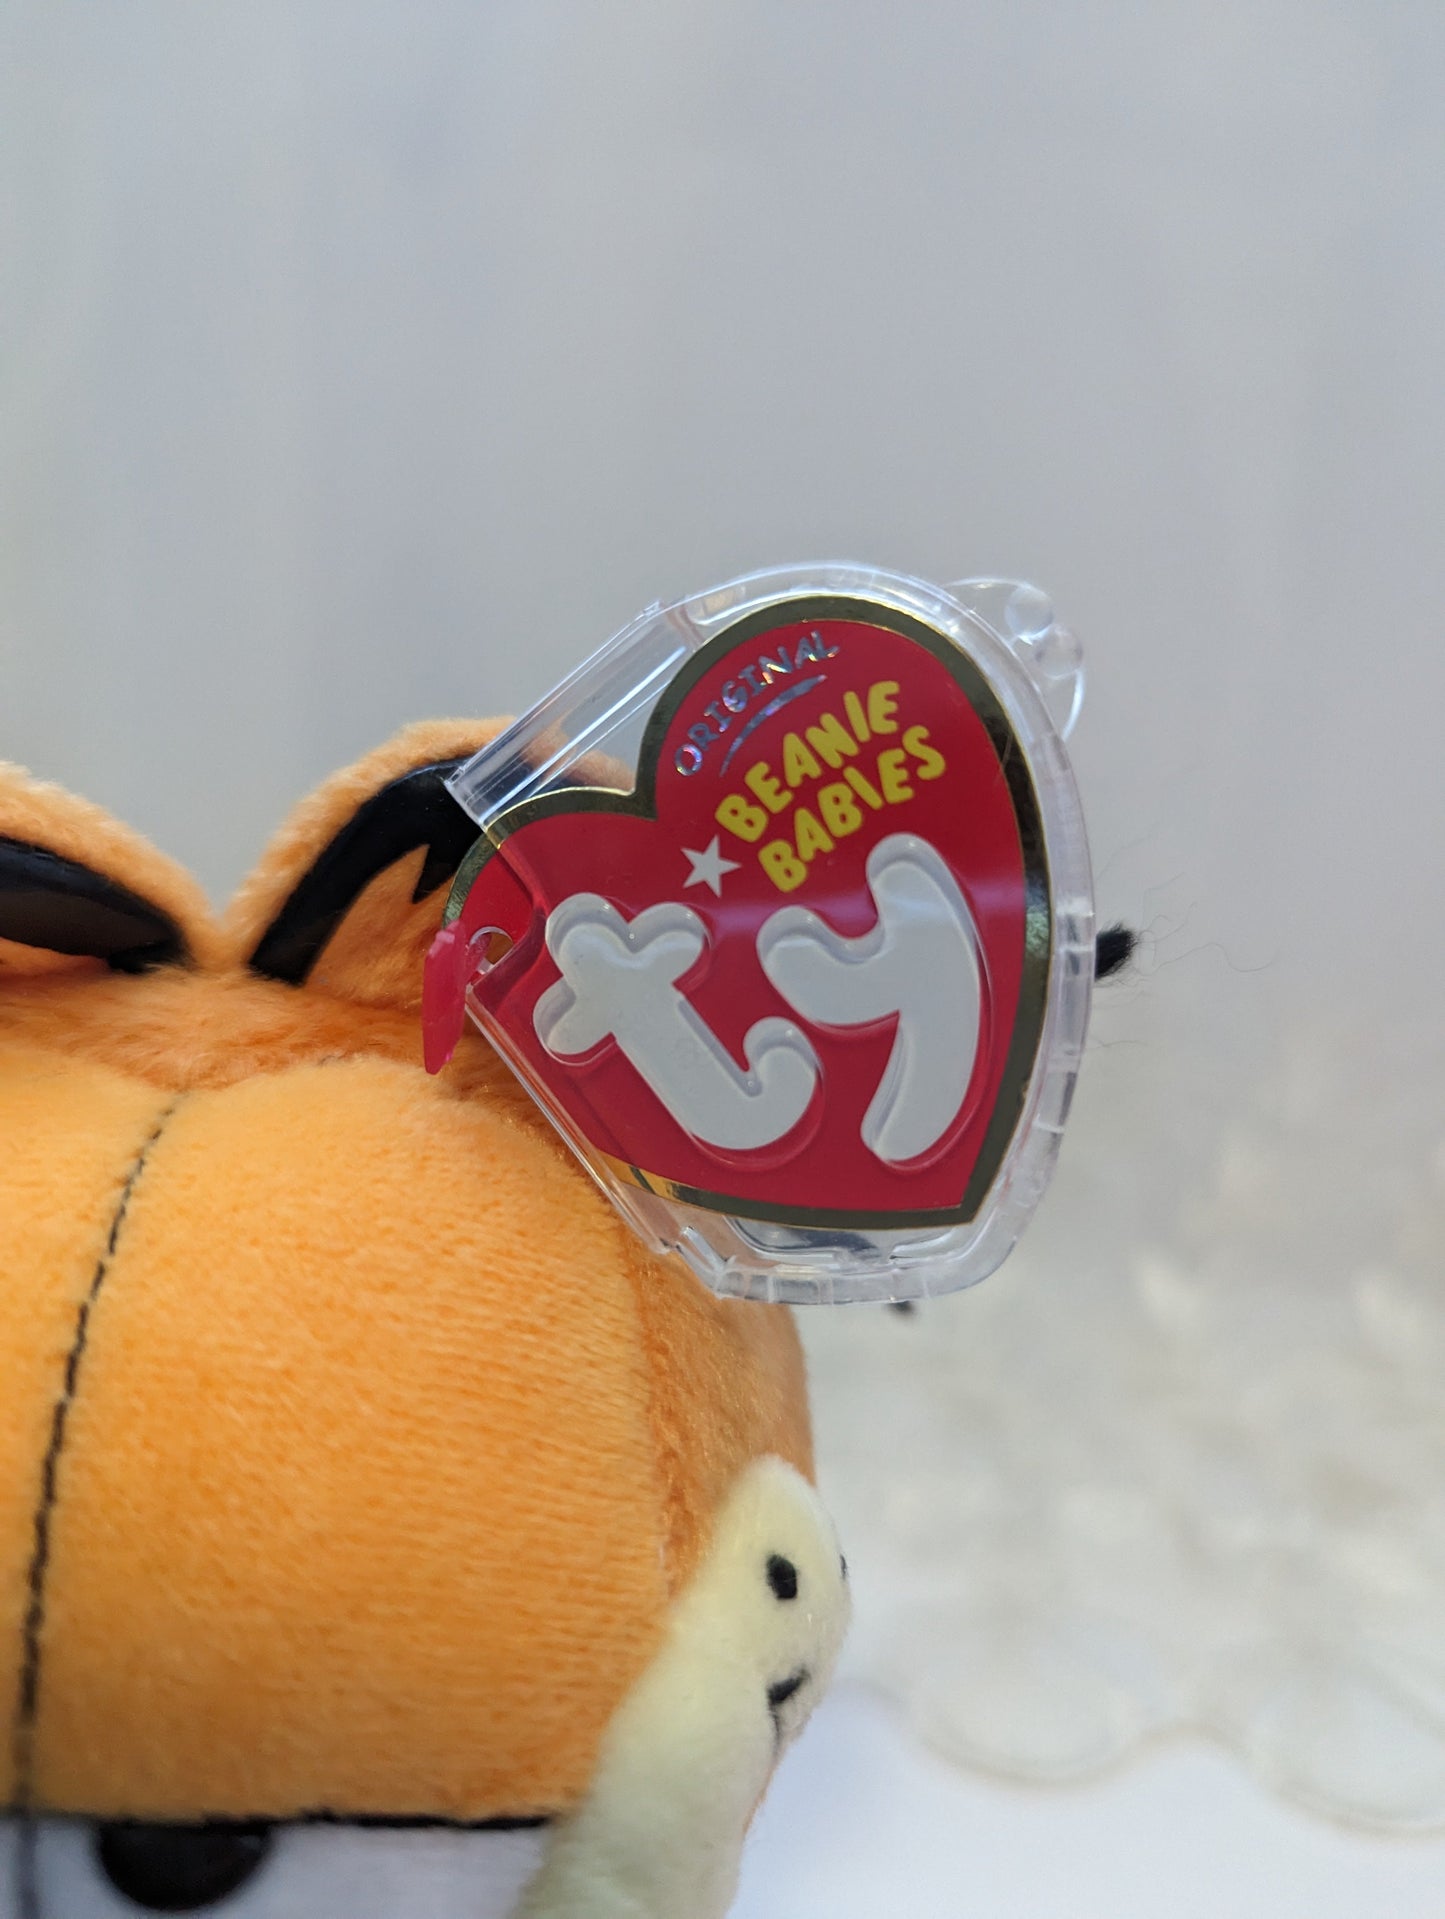 Ty Beanie Baby - Garfield With "I Don't Do Perky" Shirt On (8in) - Vintage Beanies Canada